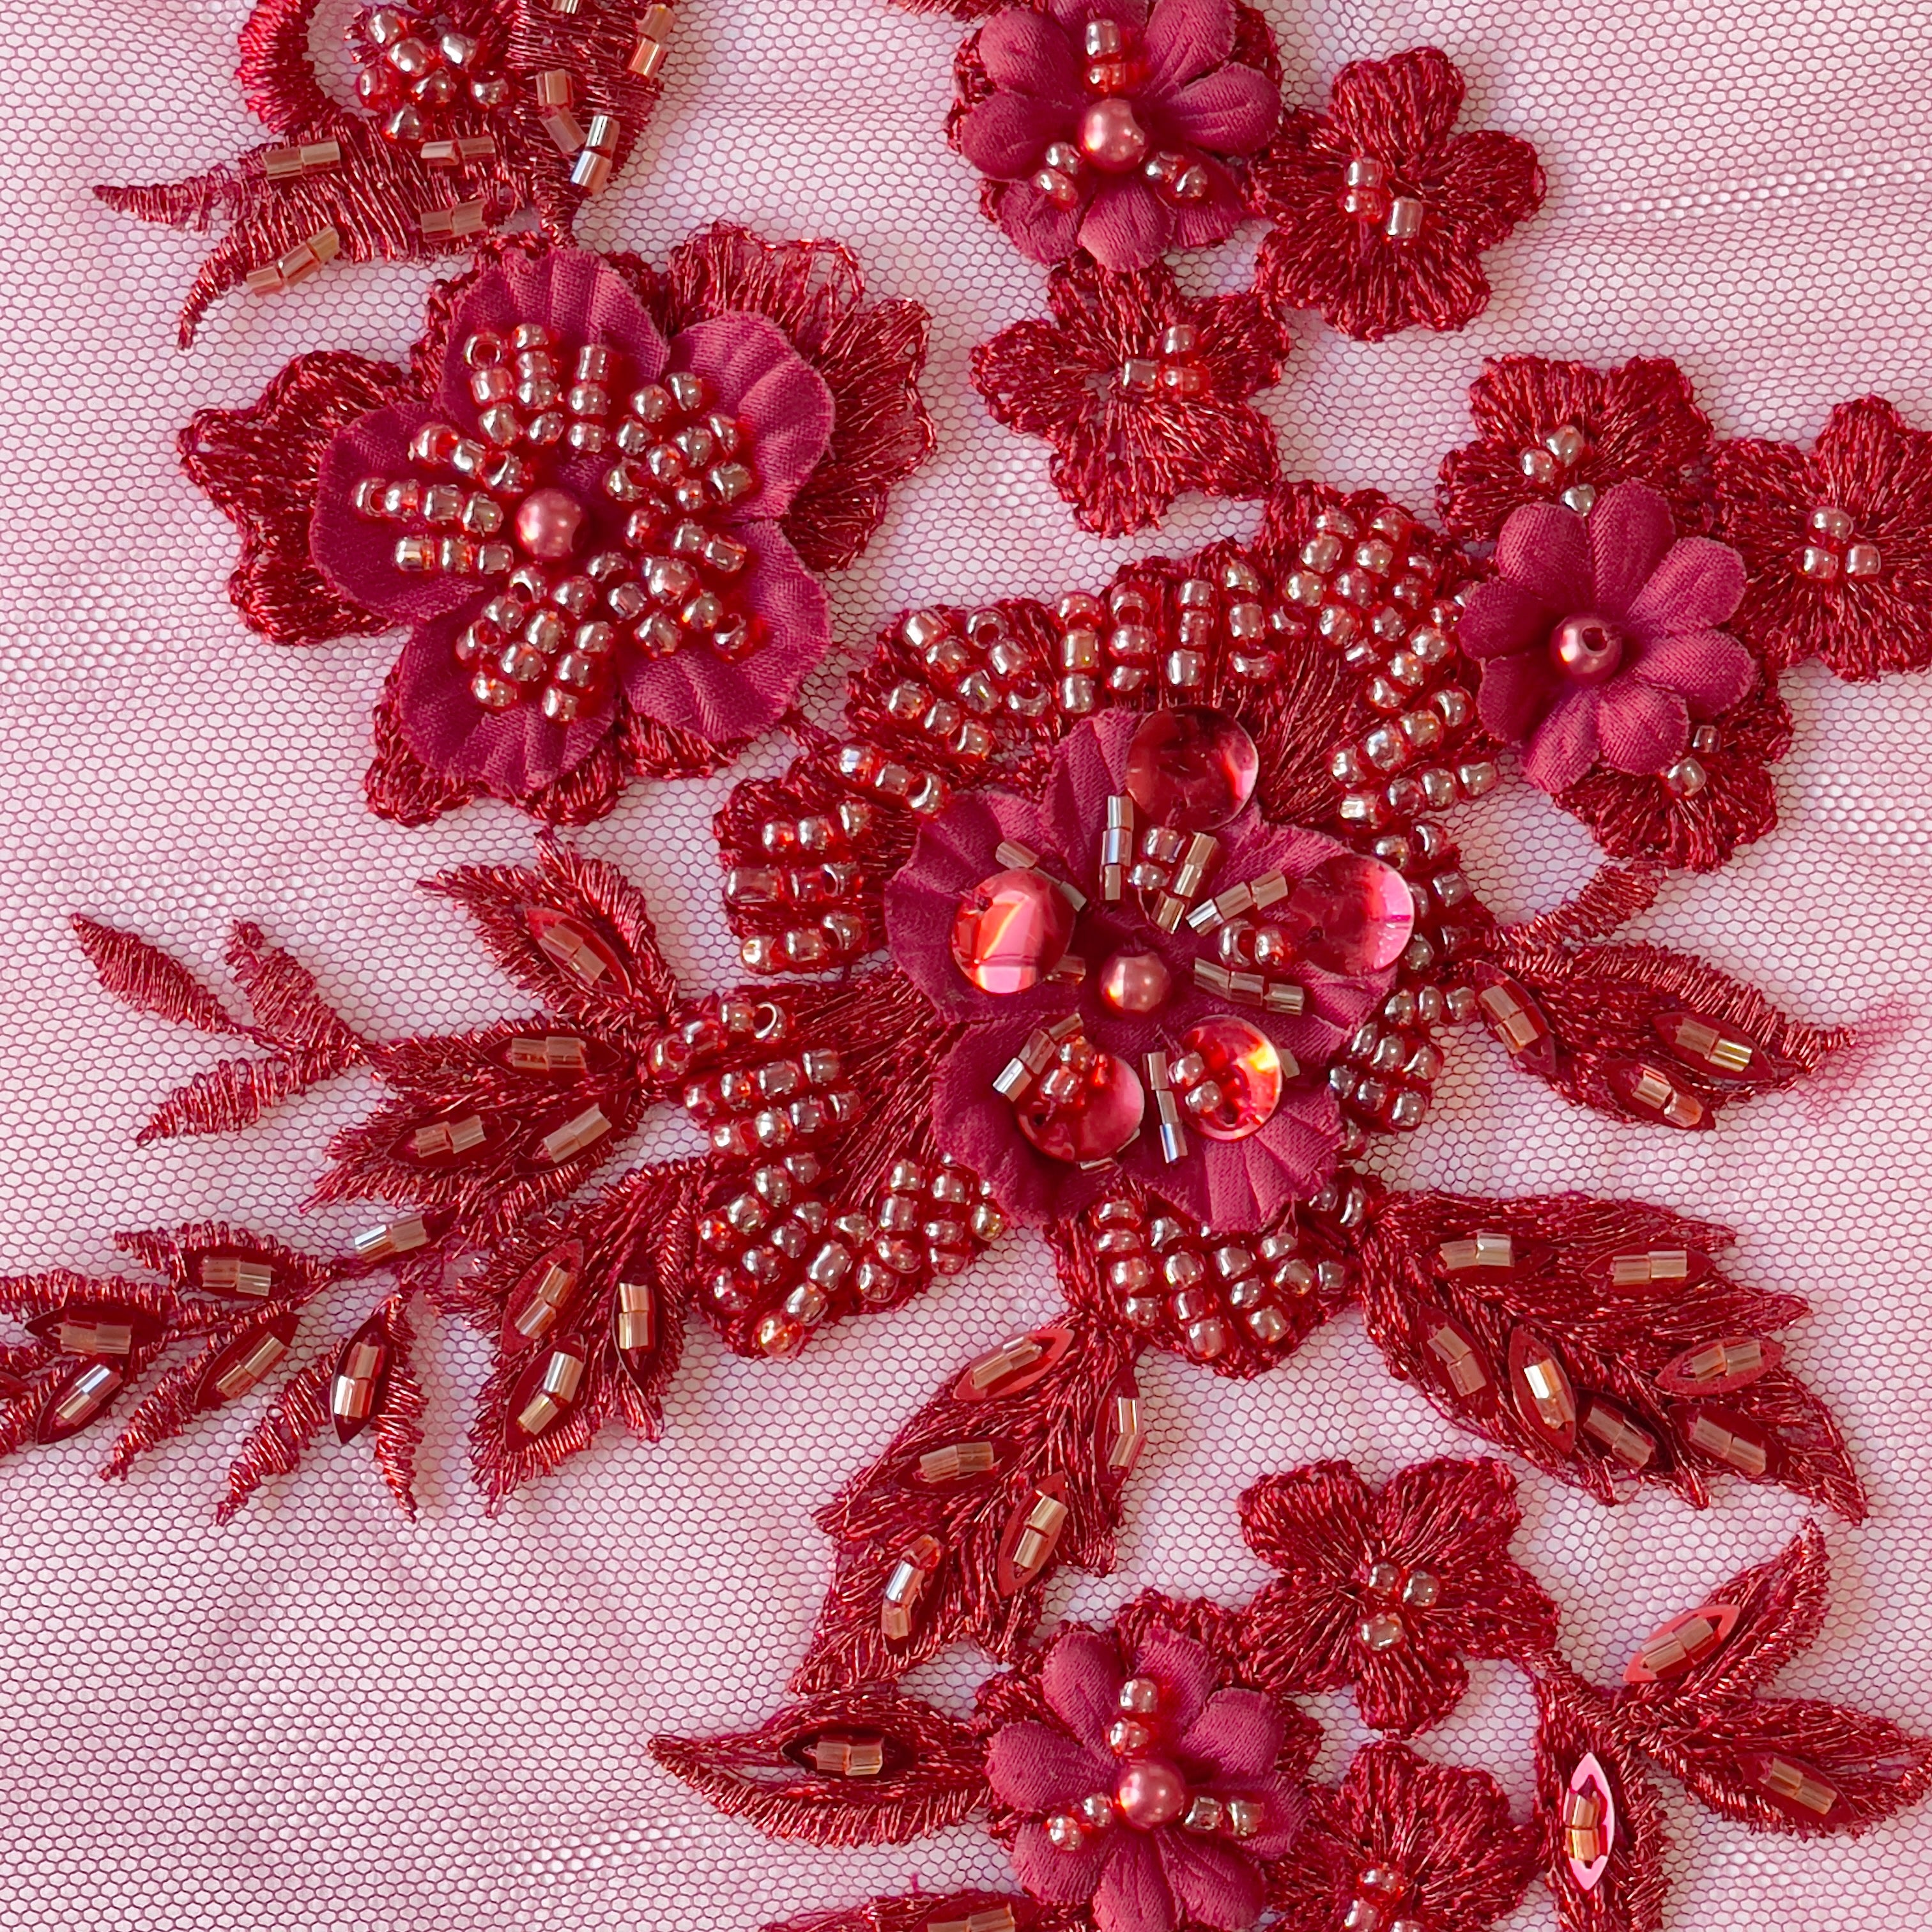 Close up view of floral applique embroidered onto a net backing.  The applique has #D flowers and is embellished with sequins and beads.